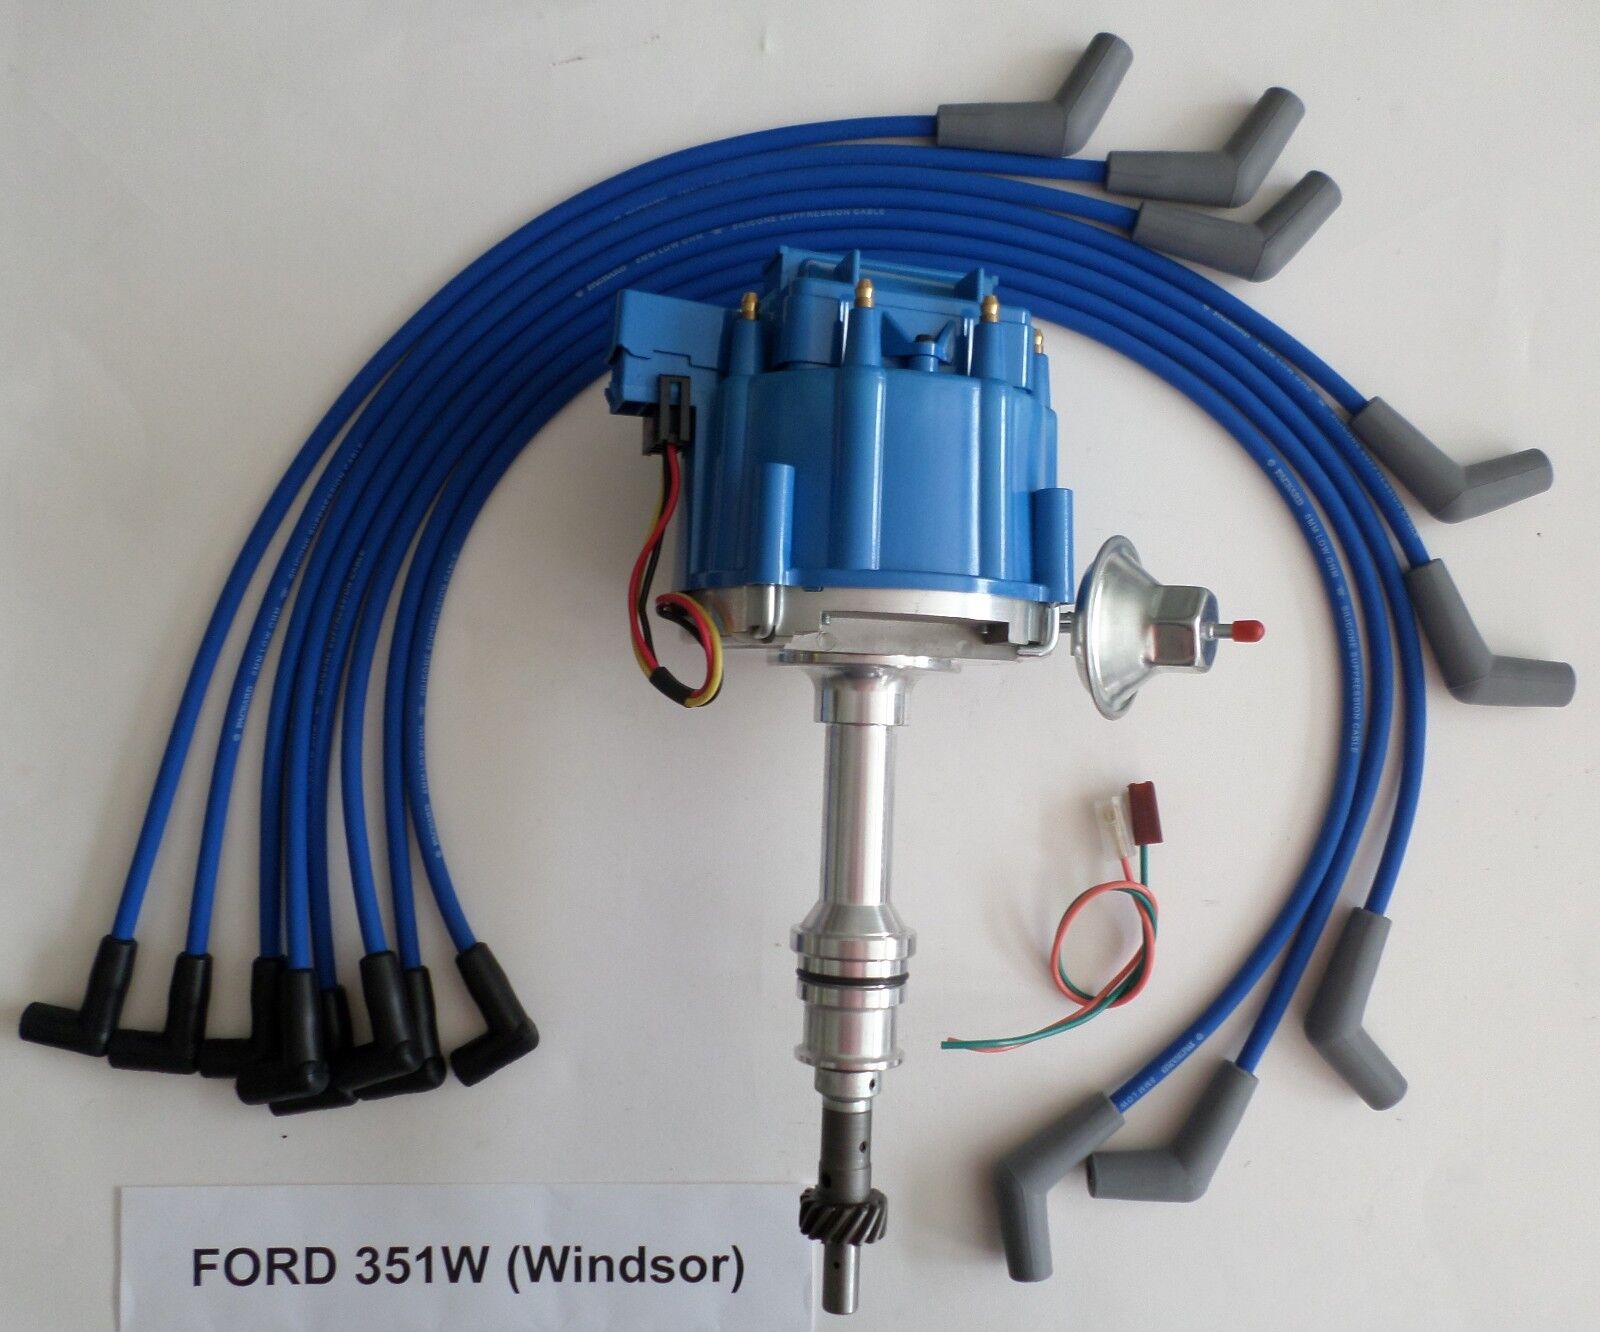 FORD 351W (Windsor) BLUE HEI Distributor + 8mm Spiral Core Spark Plug wires USA